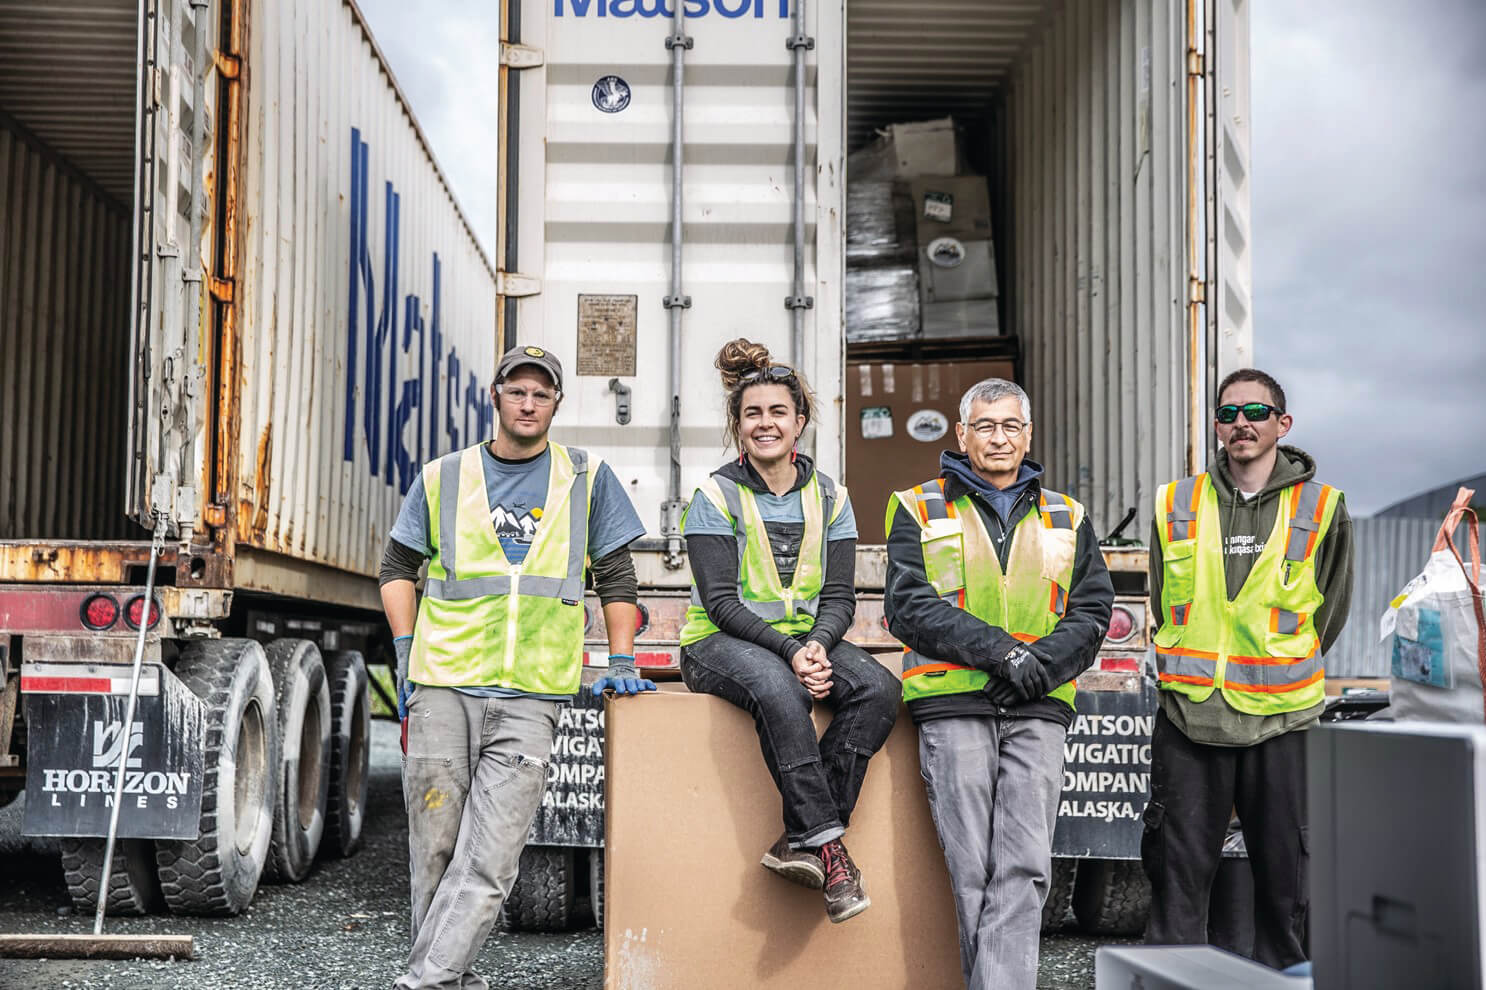 Four Backhaul stafff and volunteers wearing yellow safety vests pose in front of a Matson container loaded with e-waste.